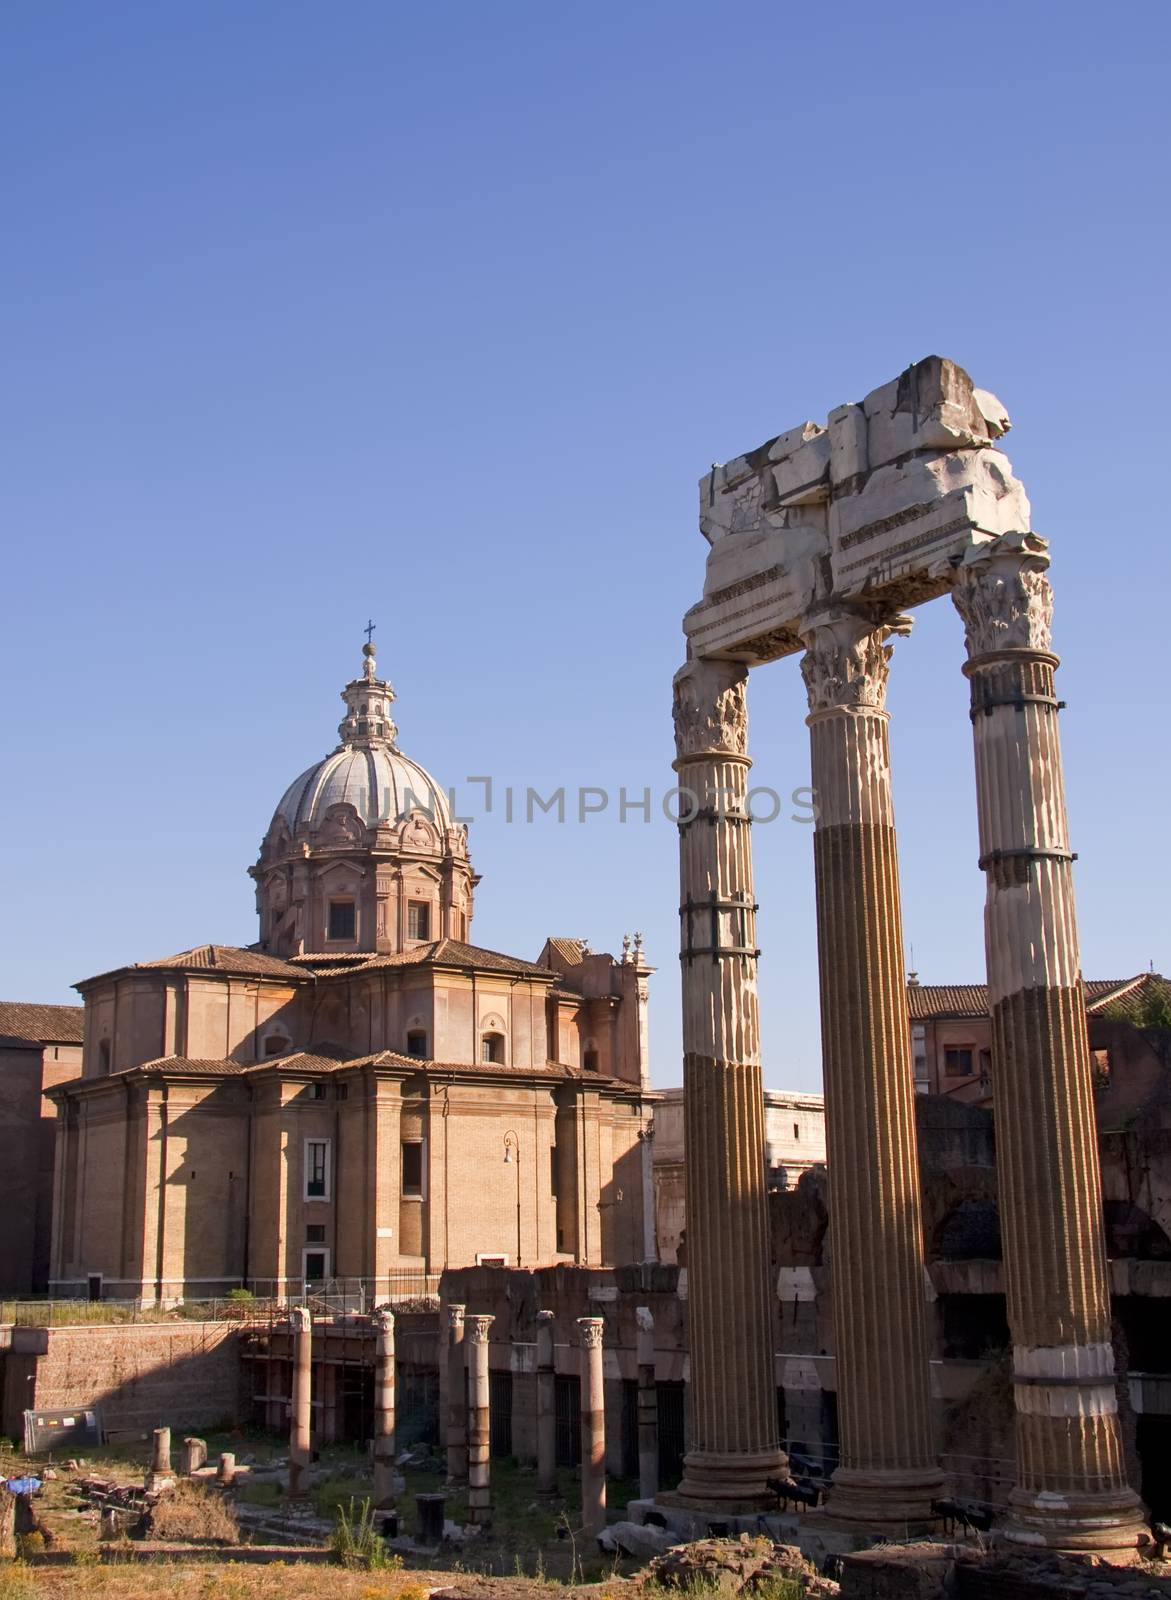 View with Forum Romanum in Rome, Italy